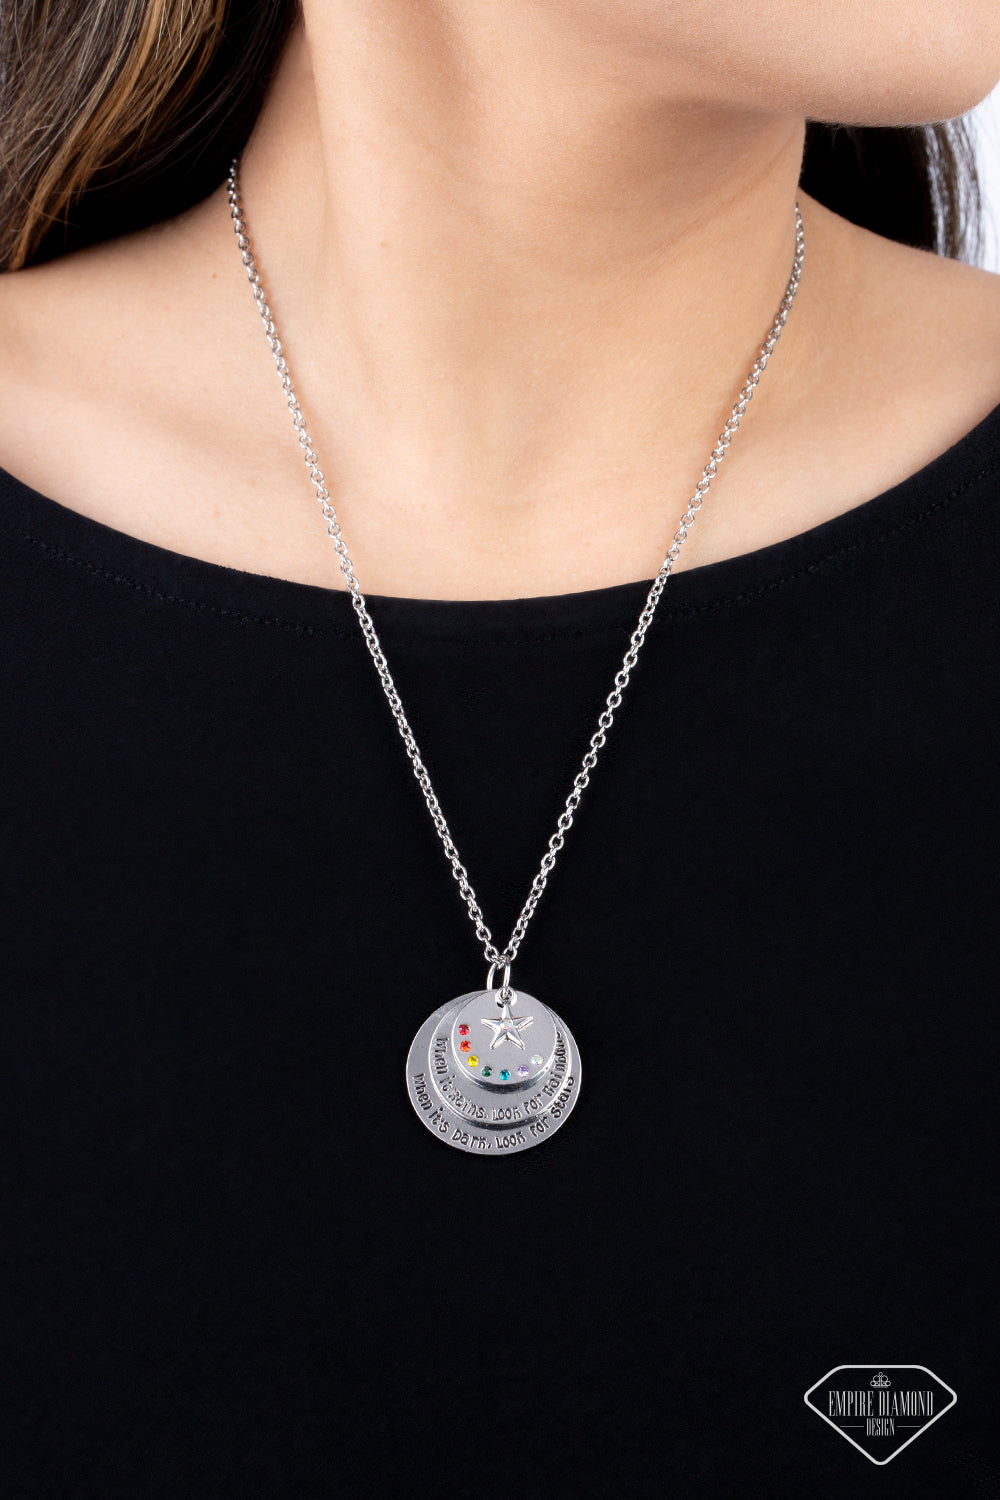 Dotted in a rainbow of dainty rhinestones, a shiny silver disc sits atop two overlapping silver discs that gradually increase in size. Sold as one individual necklace. Includes one pair of matching earrings.